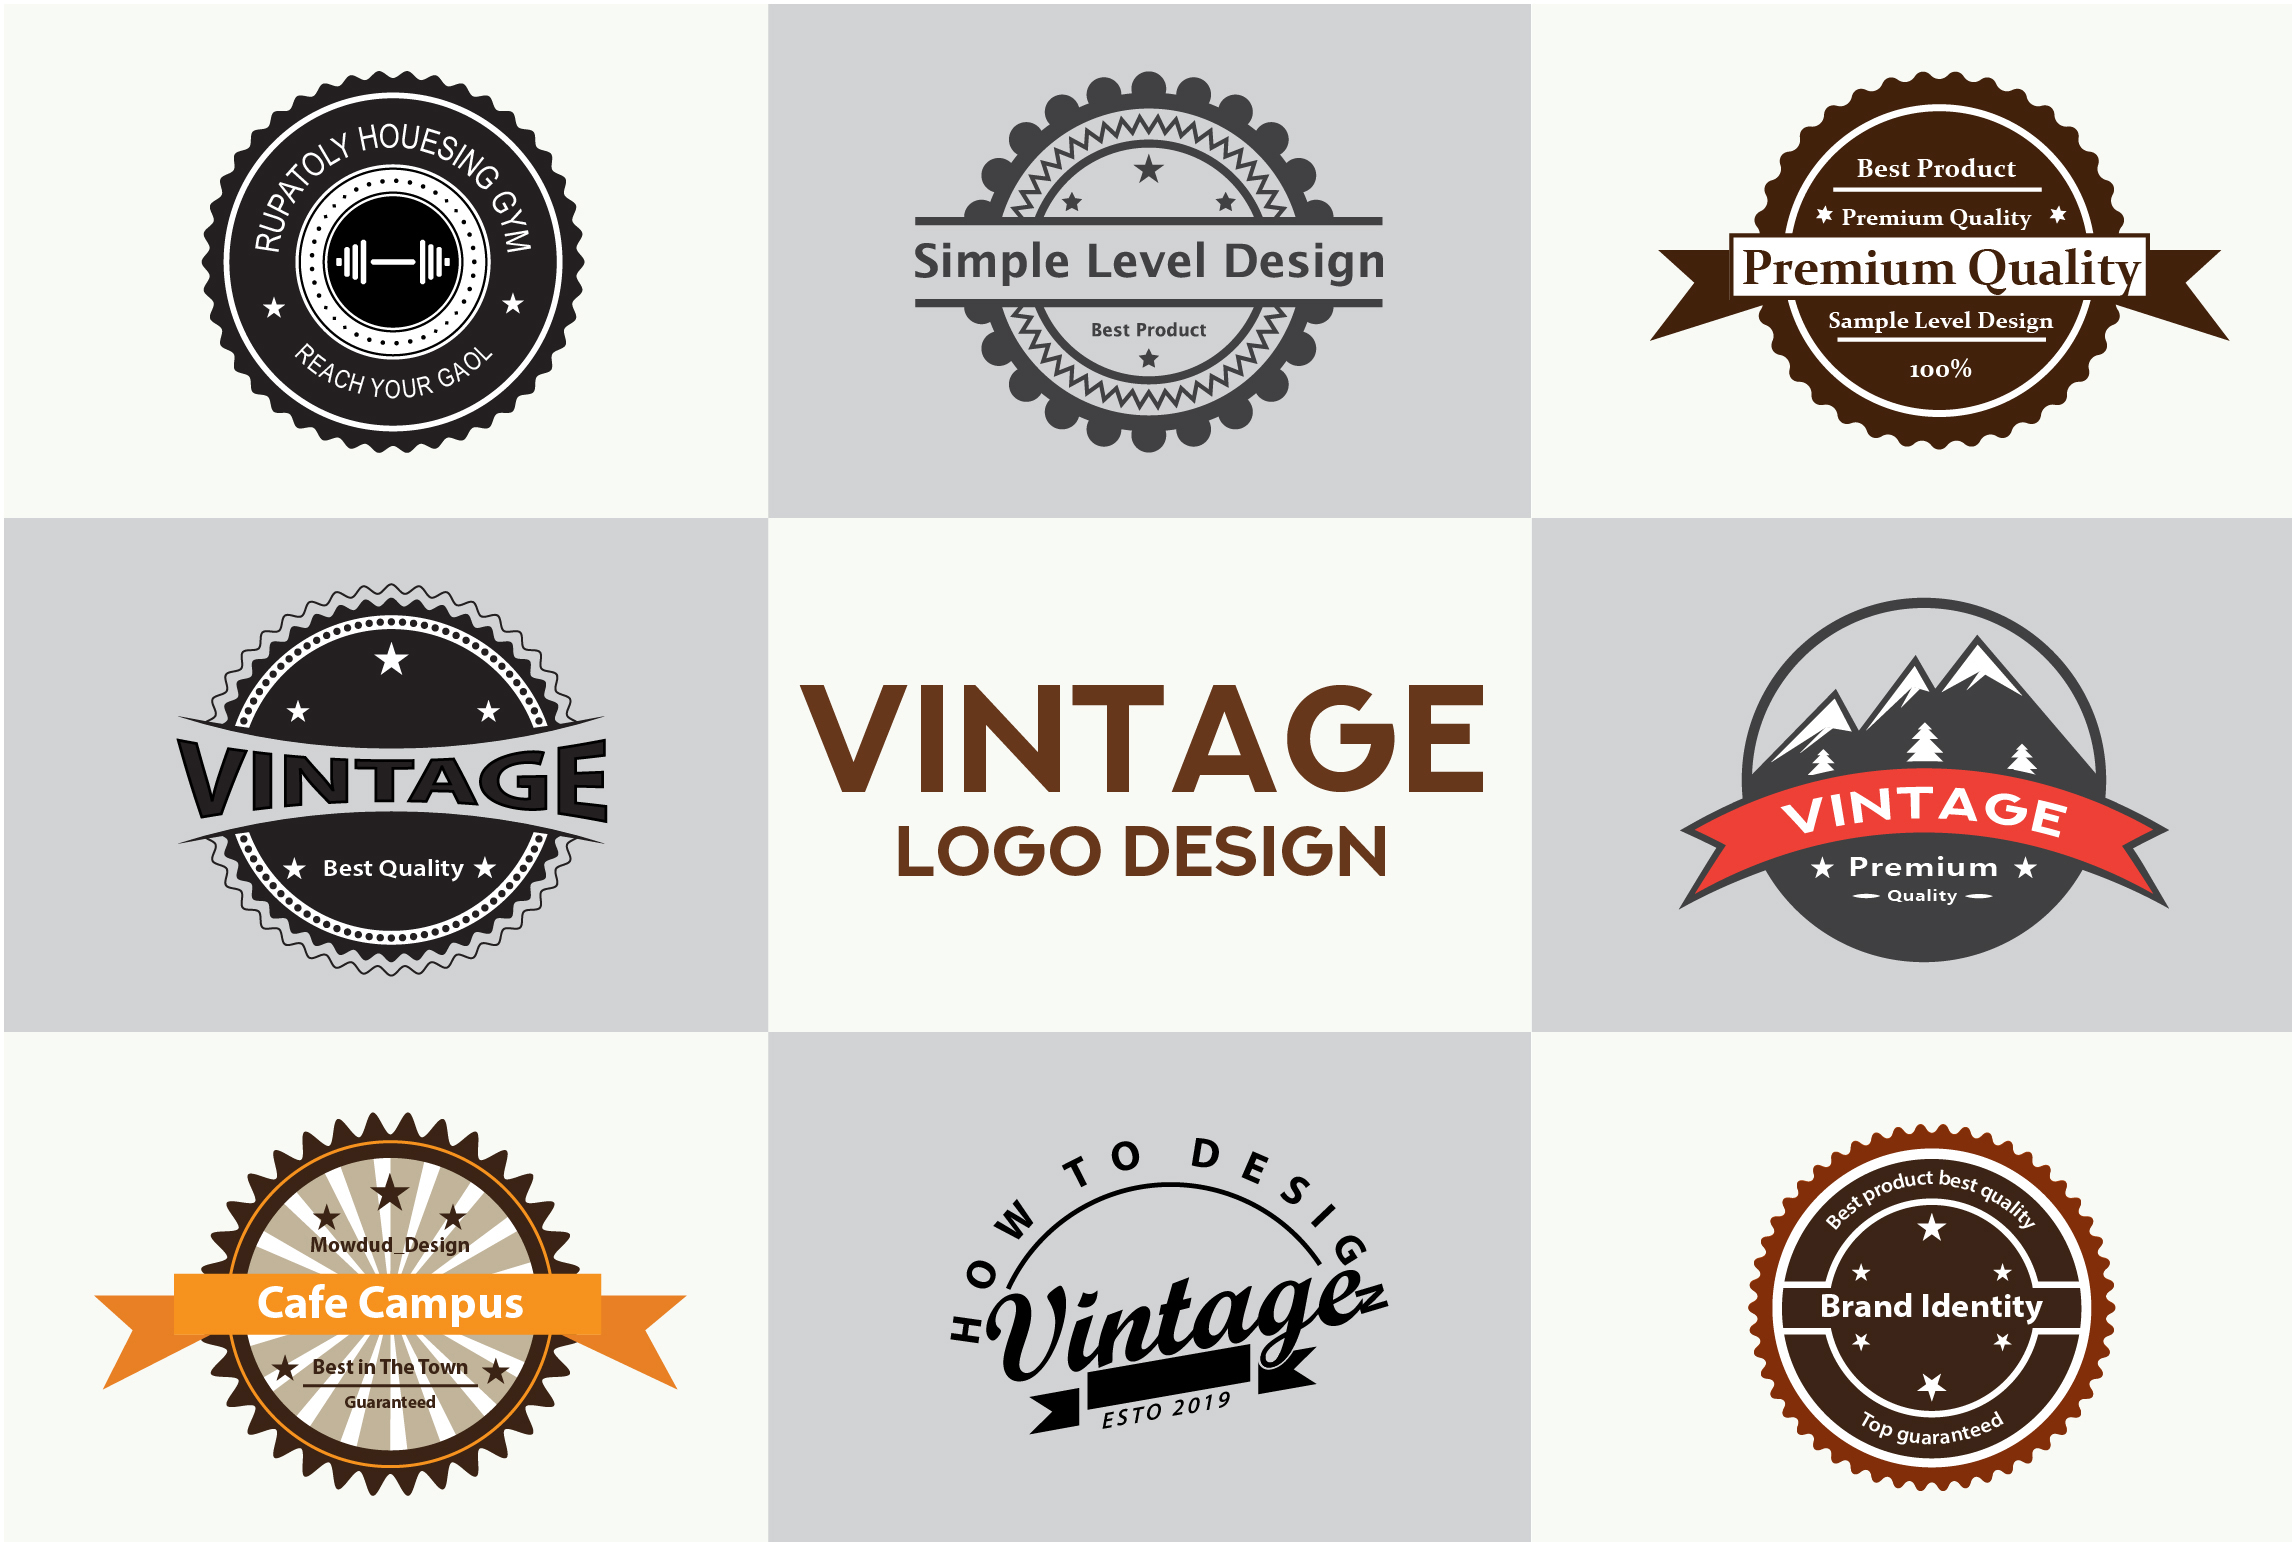 I Will Design an Awesome Business Badge or Vintage Logo for Your within 24 hours